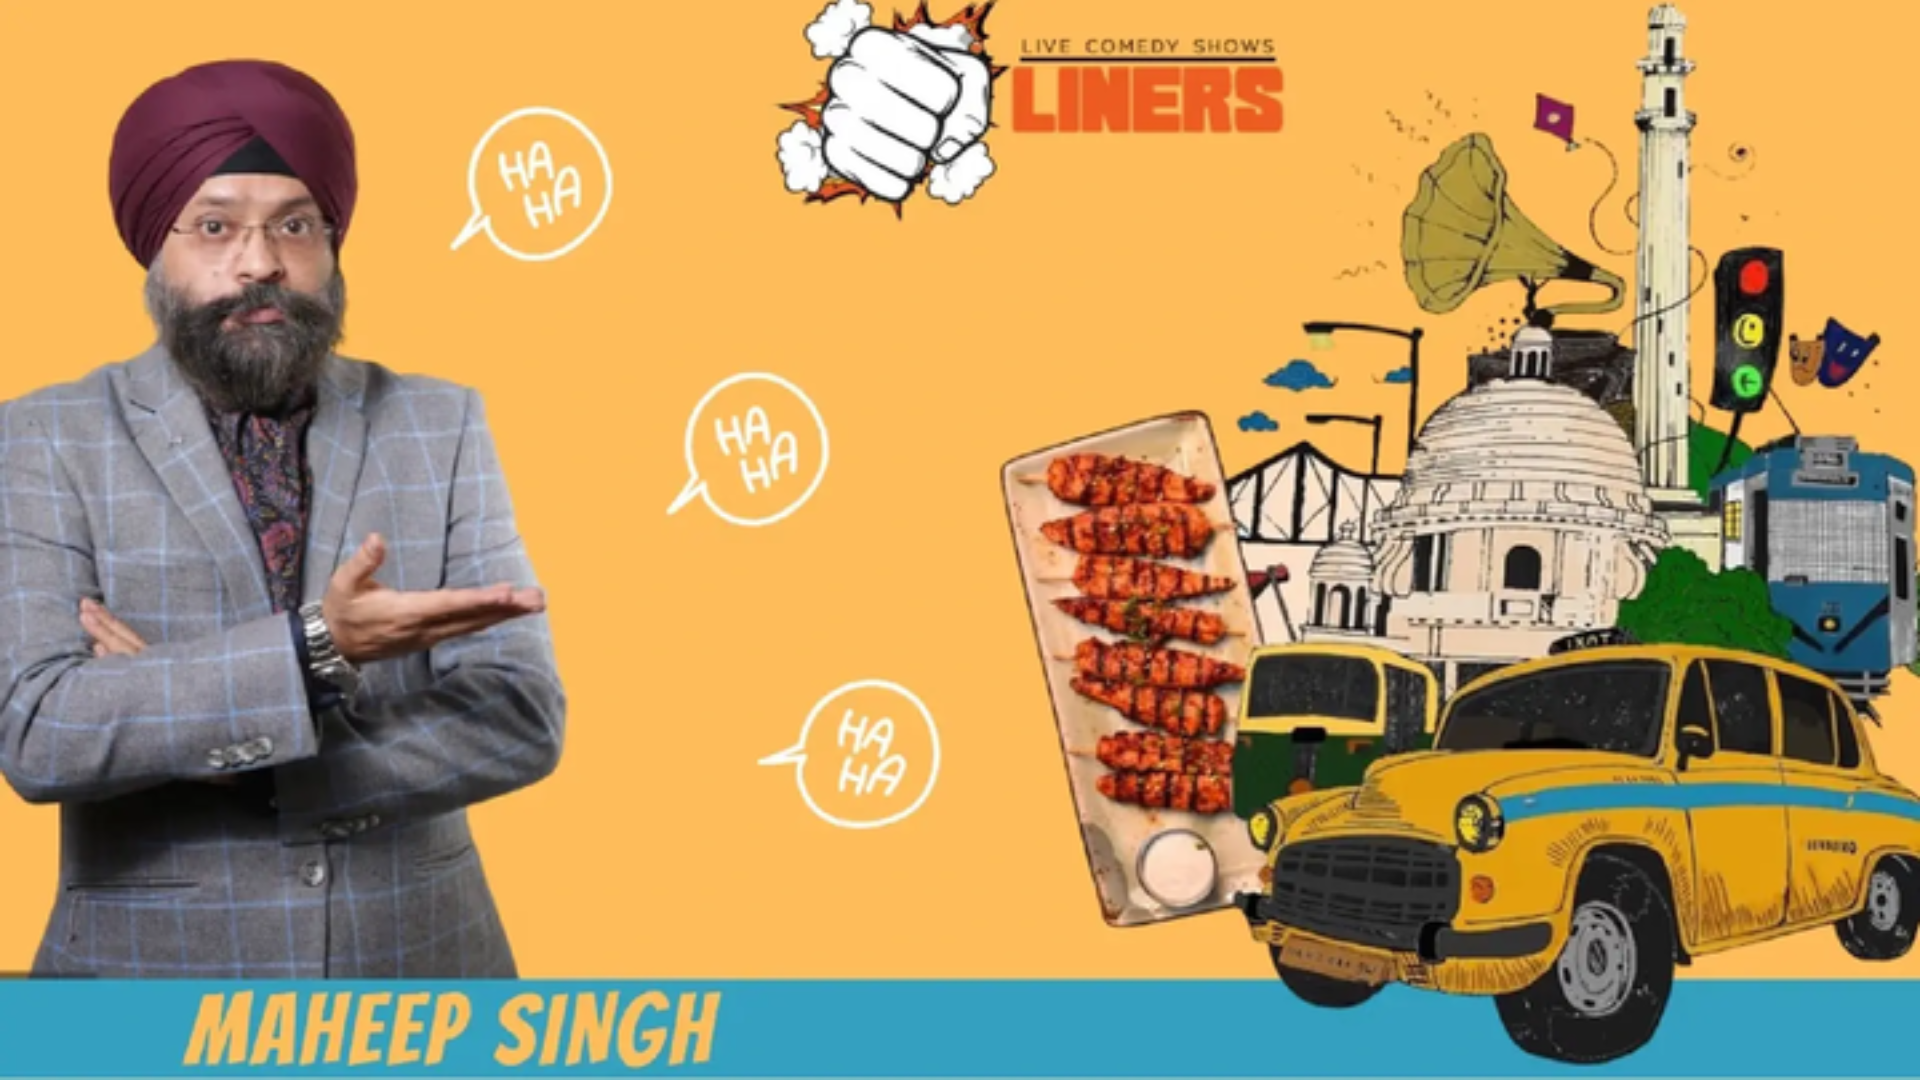 Punchliners Comedy Show ft Maheep Singh